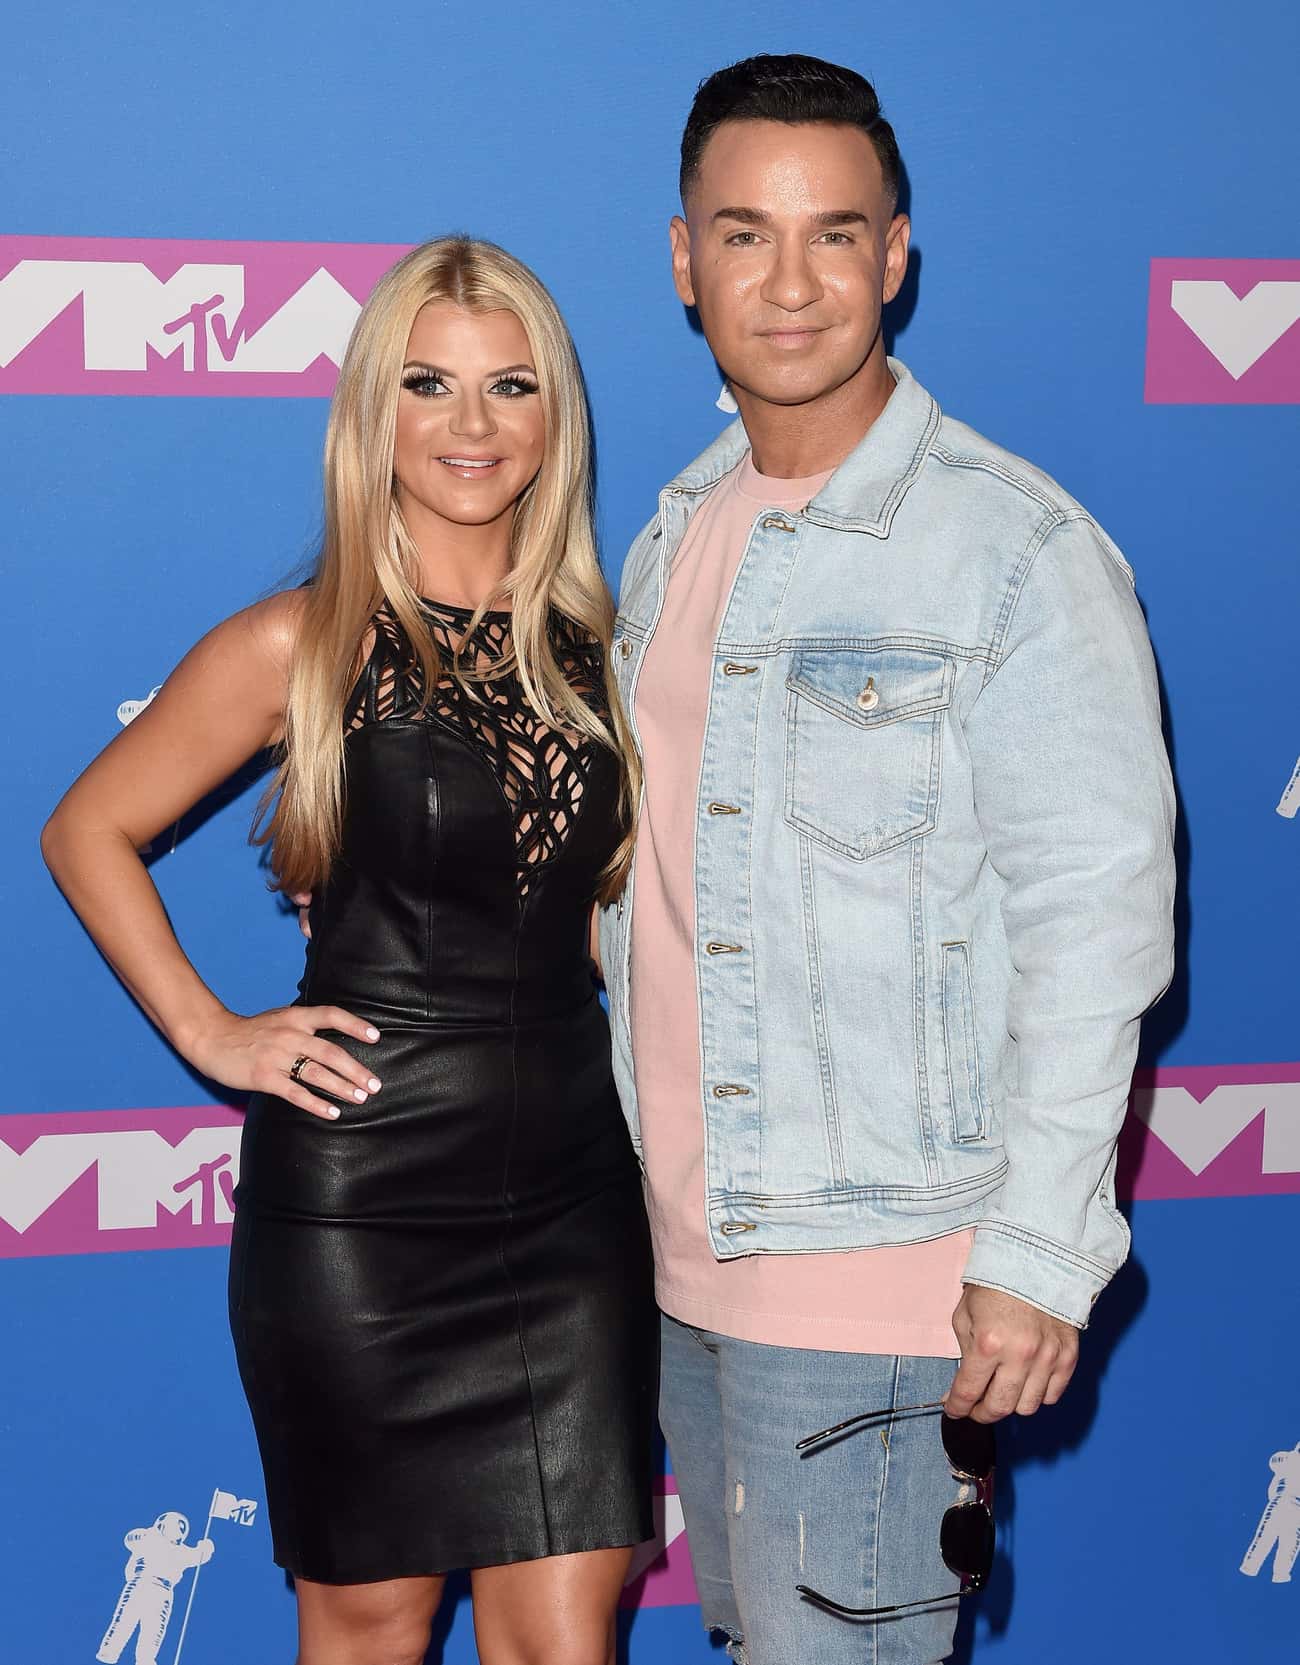 Mike 'The Situation' Sorrentino Married Lauren Pesce